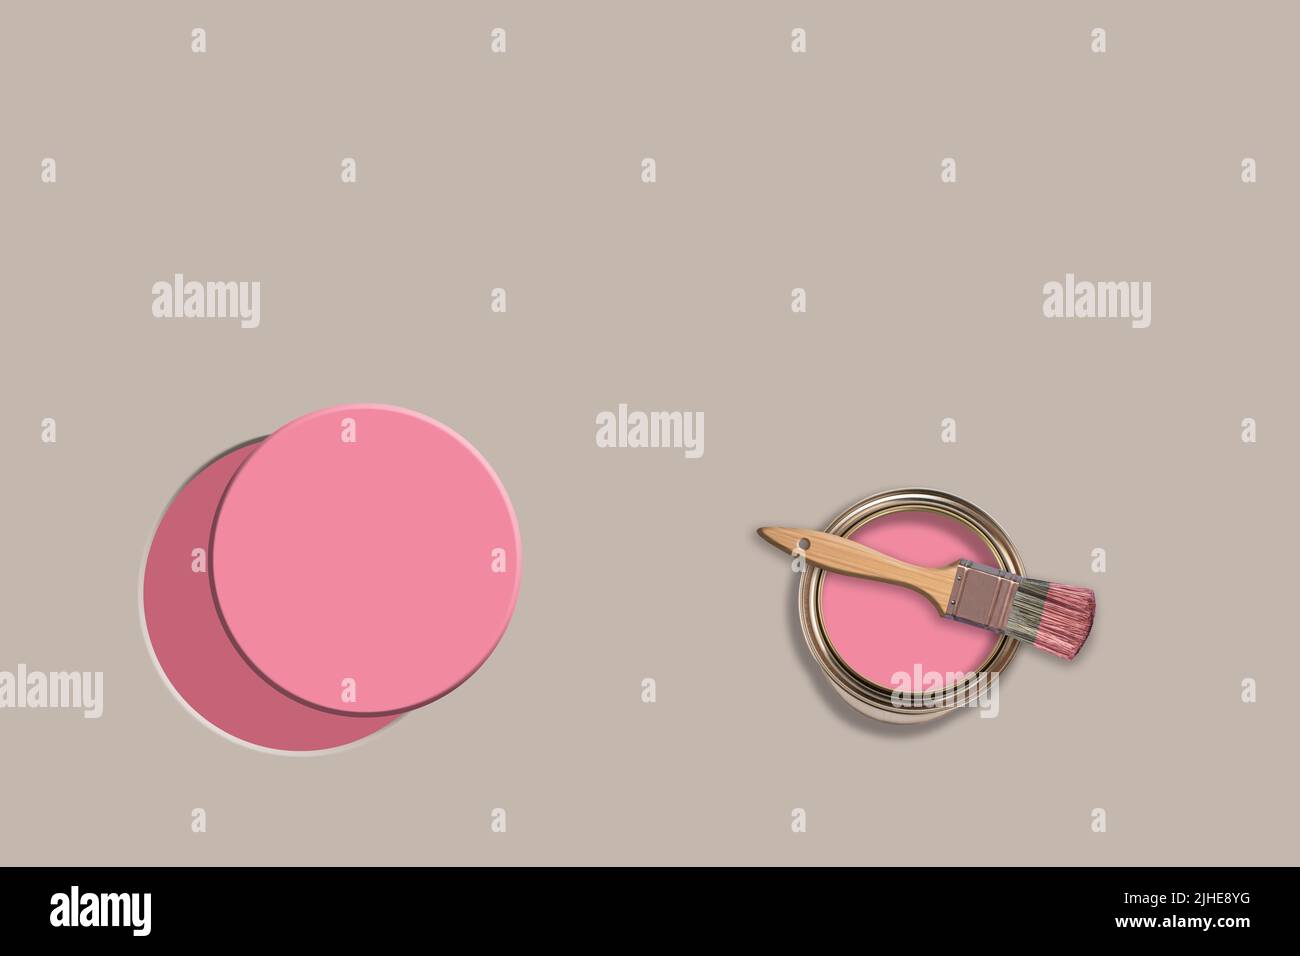 creative concept image of decorating remodeling painting paint paint pot can tin brush on a colourful grey background painted pink circle Stock Photo